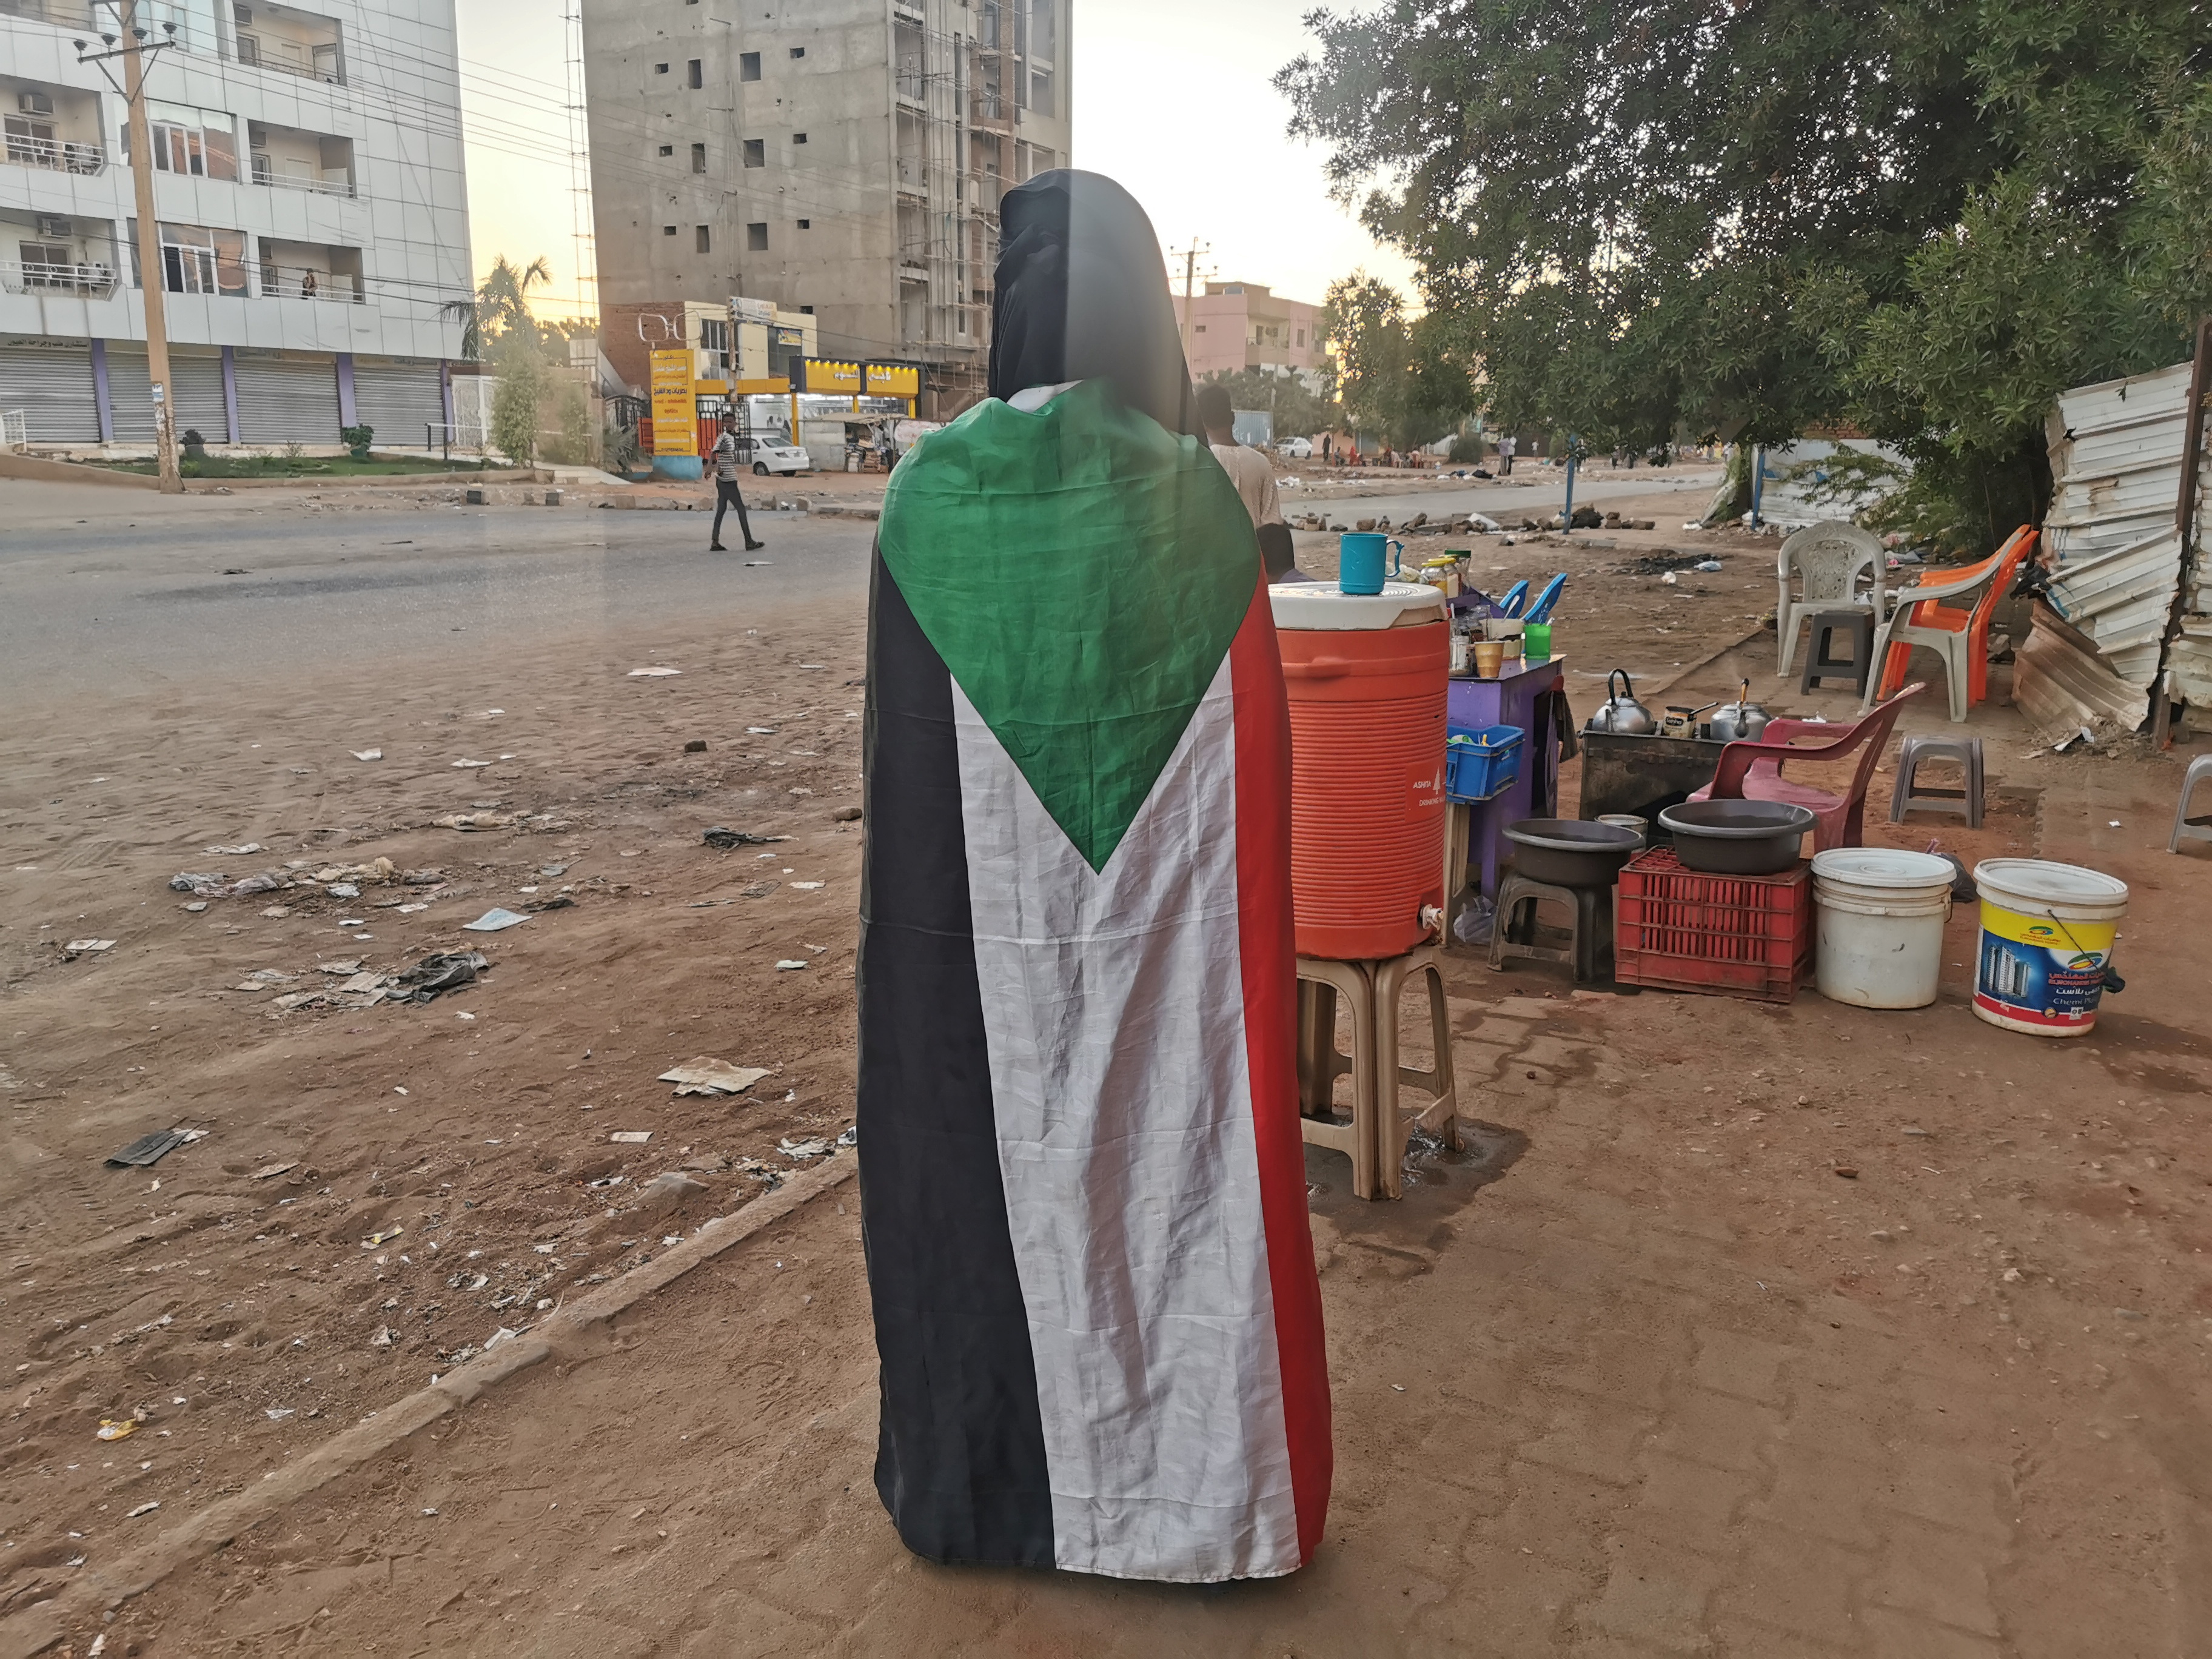 A person wears a Sudanese flag during a protest, in Khartoum, Sudan, November 25, 2021. REUTERS/El Tayeb Siddig